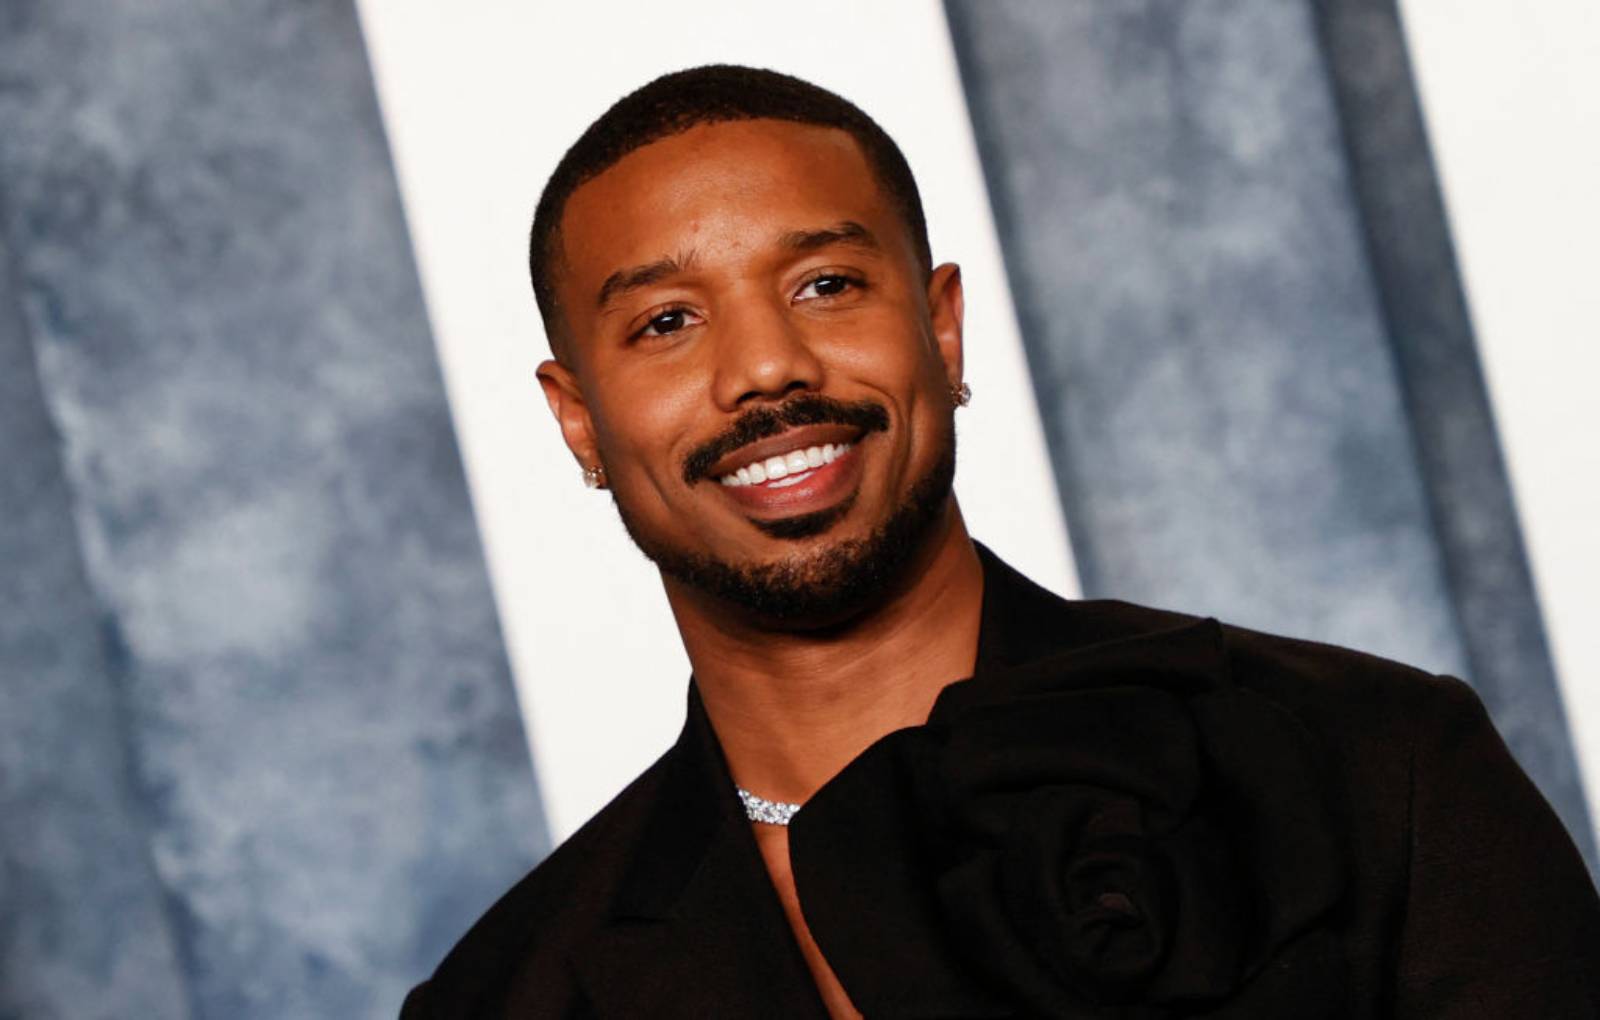 US actor Michael B. Jordan attends the Vanity Fair 95th Oscars Party at the The Wallis Annenberg Center for the Performing Arts in Beverly Hills, California on March 12, 2023. (Photo by Michael TRAN / AFP) (Photo by MICHAEL TRAN/AFP via Getty Images)